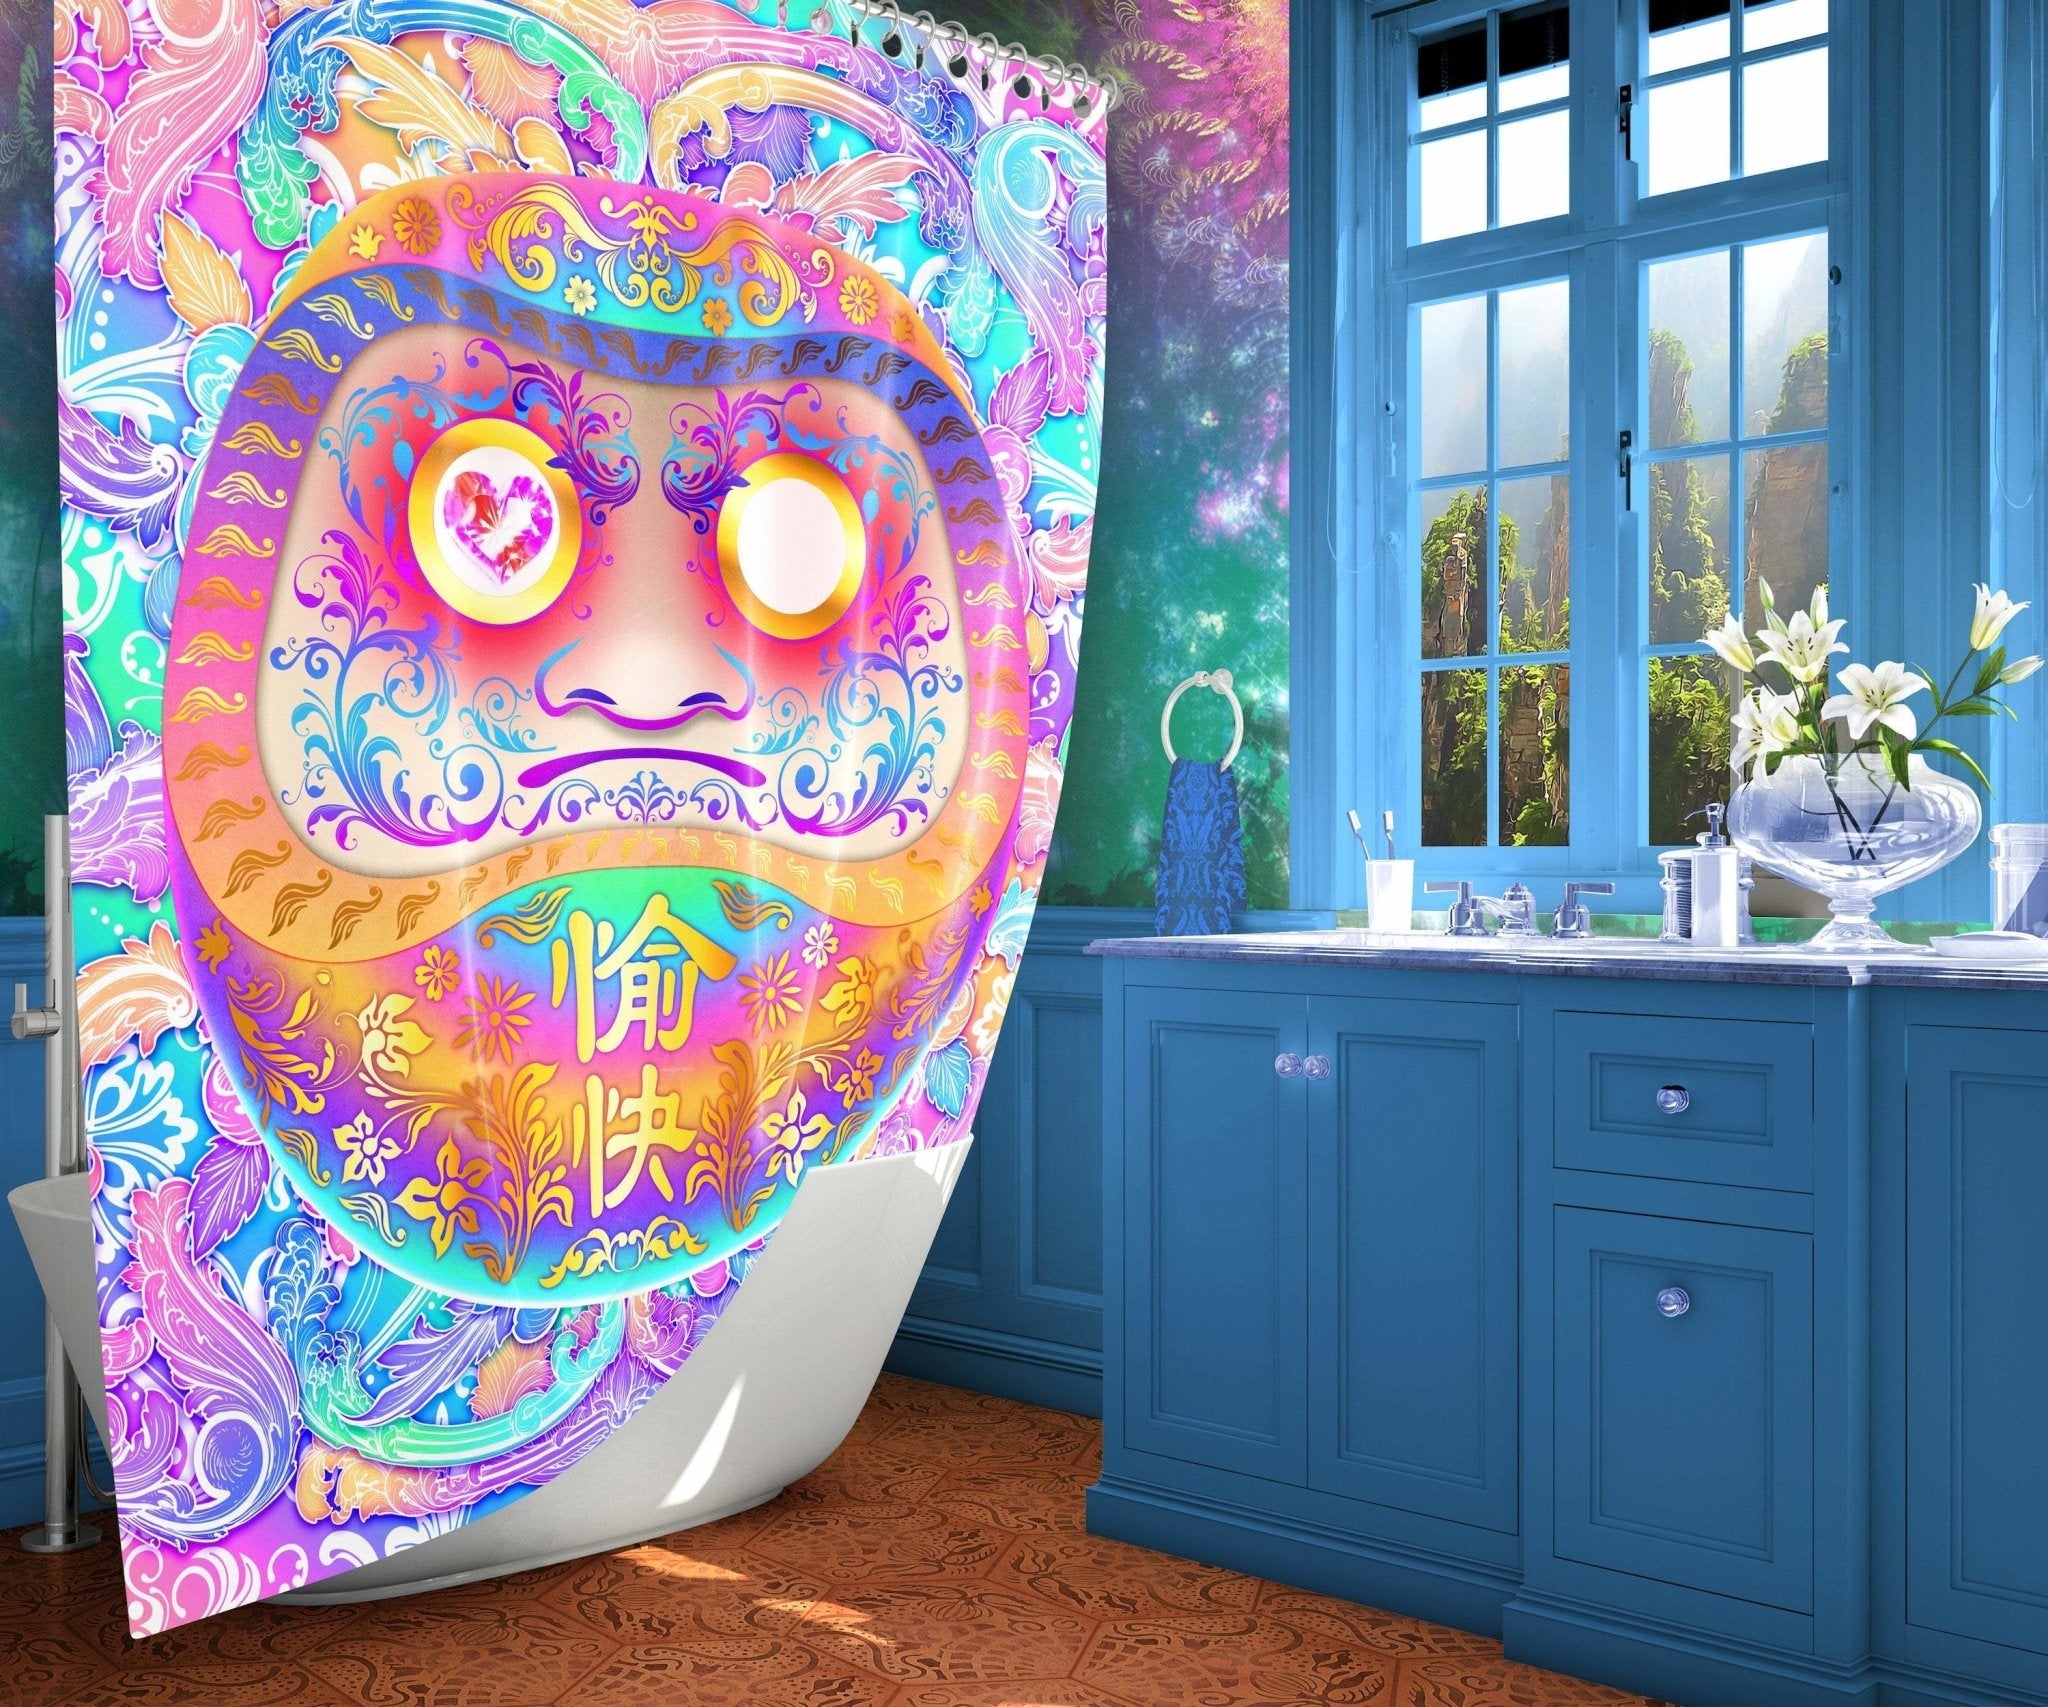 Yume Kawaii Shower Curtain, Fairy Kei, Aesthetic and Holographic Bathroom Decor, Anime Art, Eclectic and Funky Home - Pastel Daruma - Abysm Internal